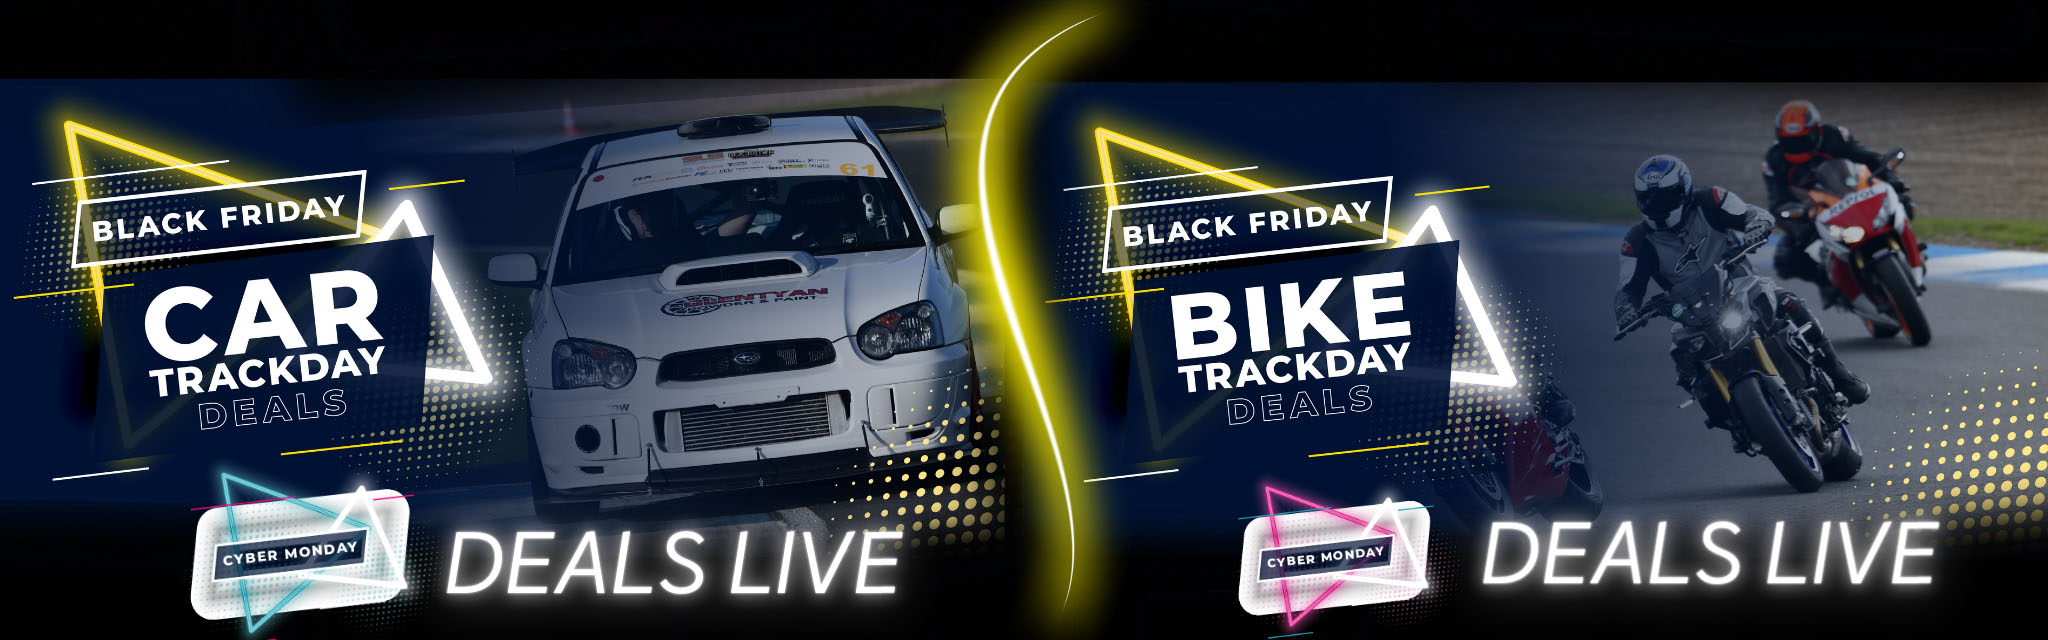 Cyber Monday  car and Bike trackday deals live